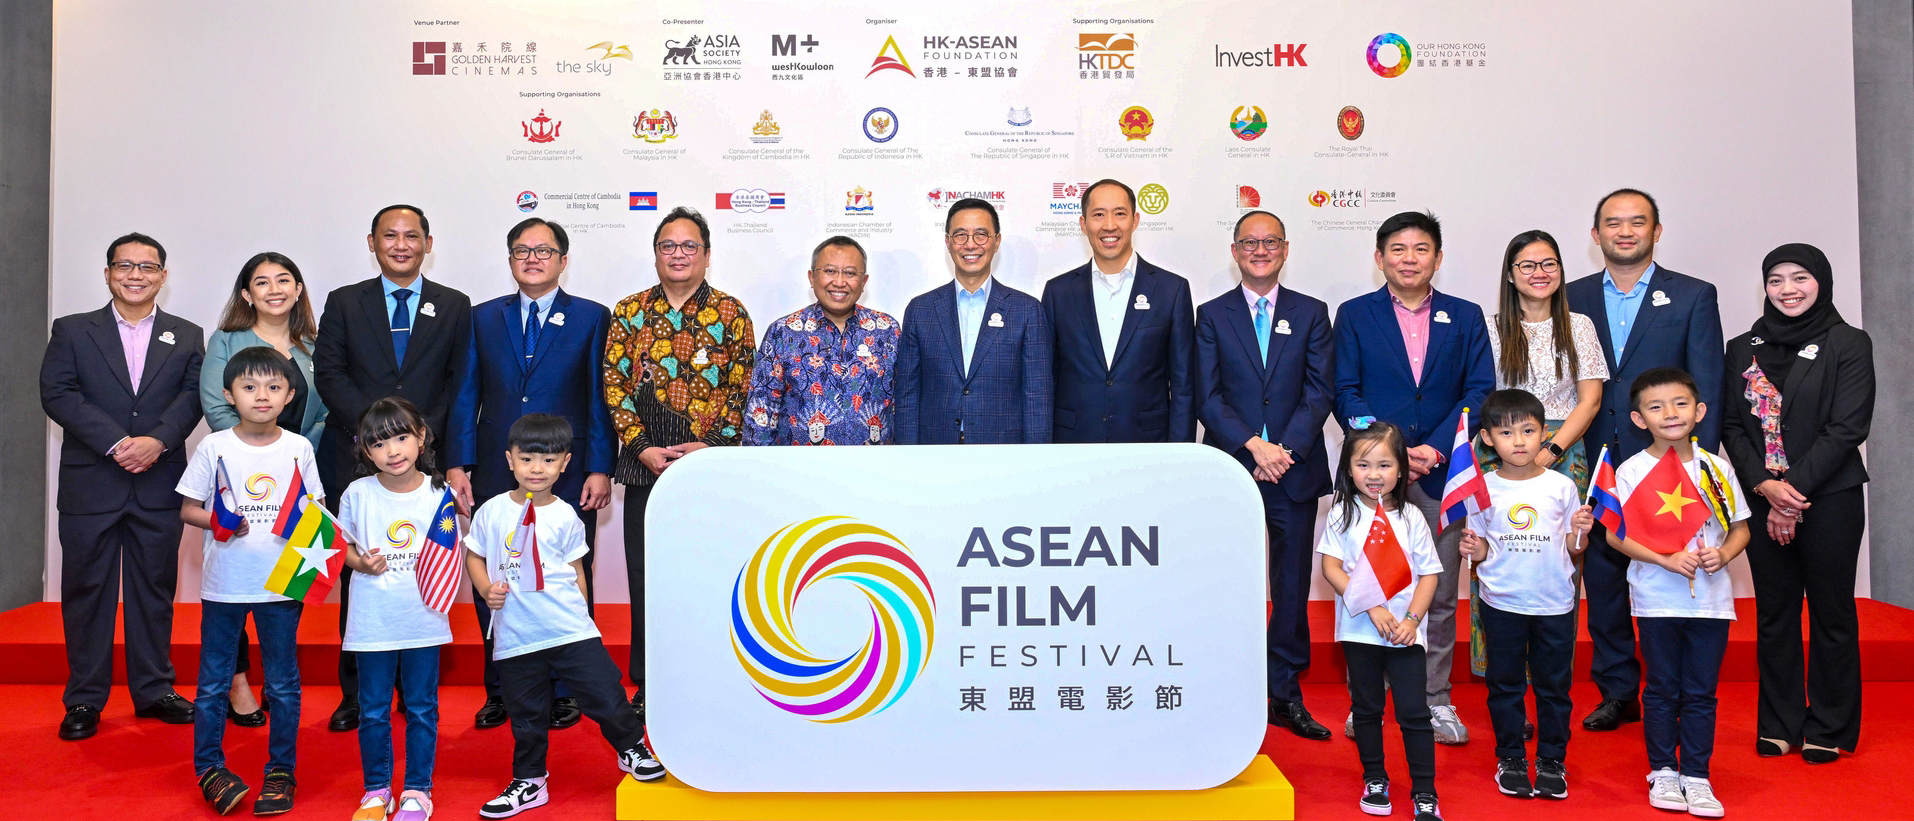 ASEAN FILM FESTIVAL: An immersive journey into cinematic diversity of Southeast Asia